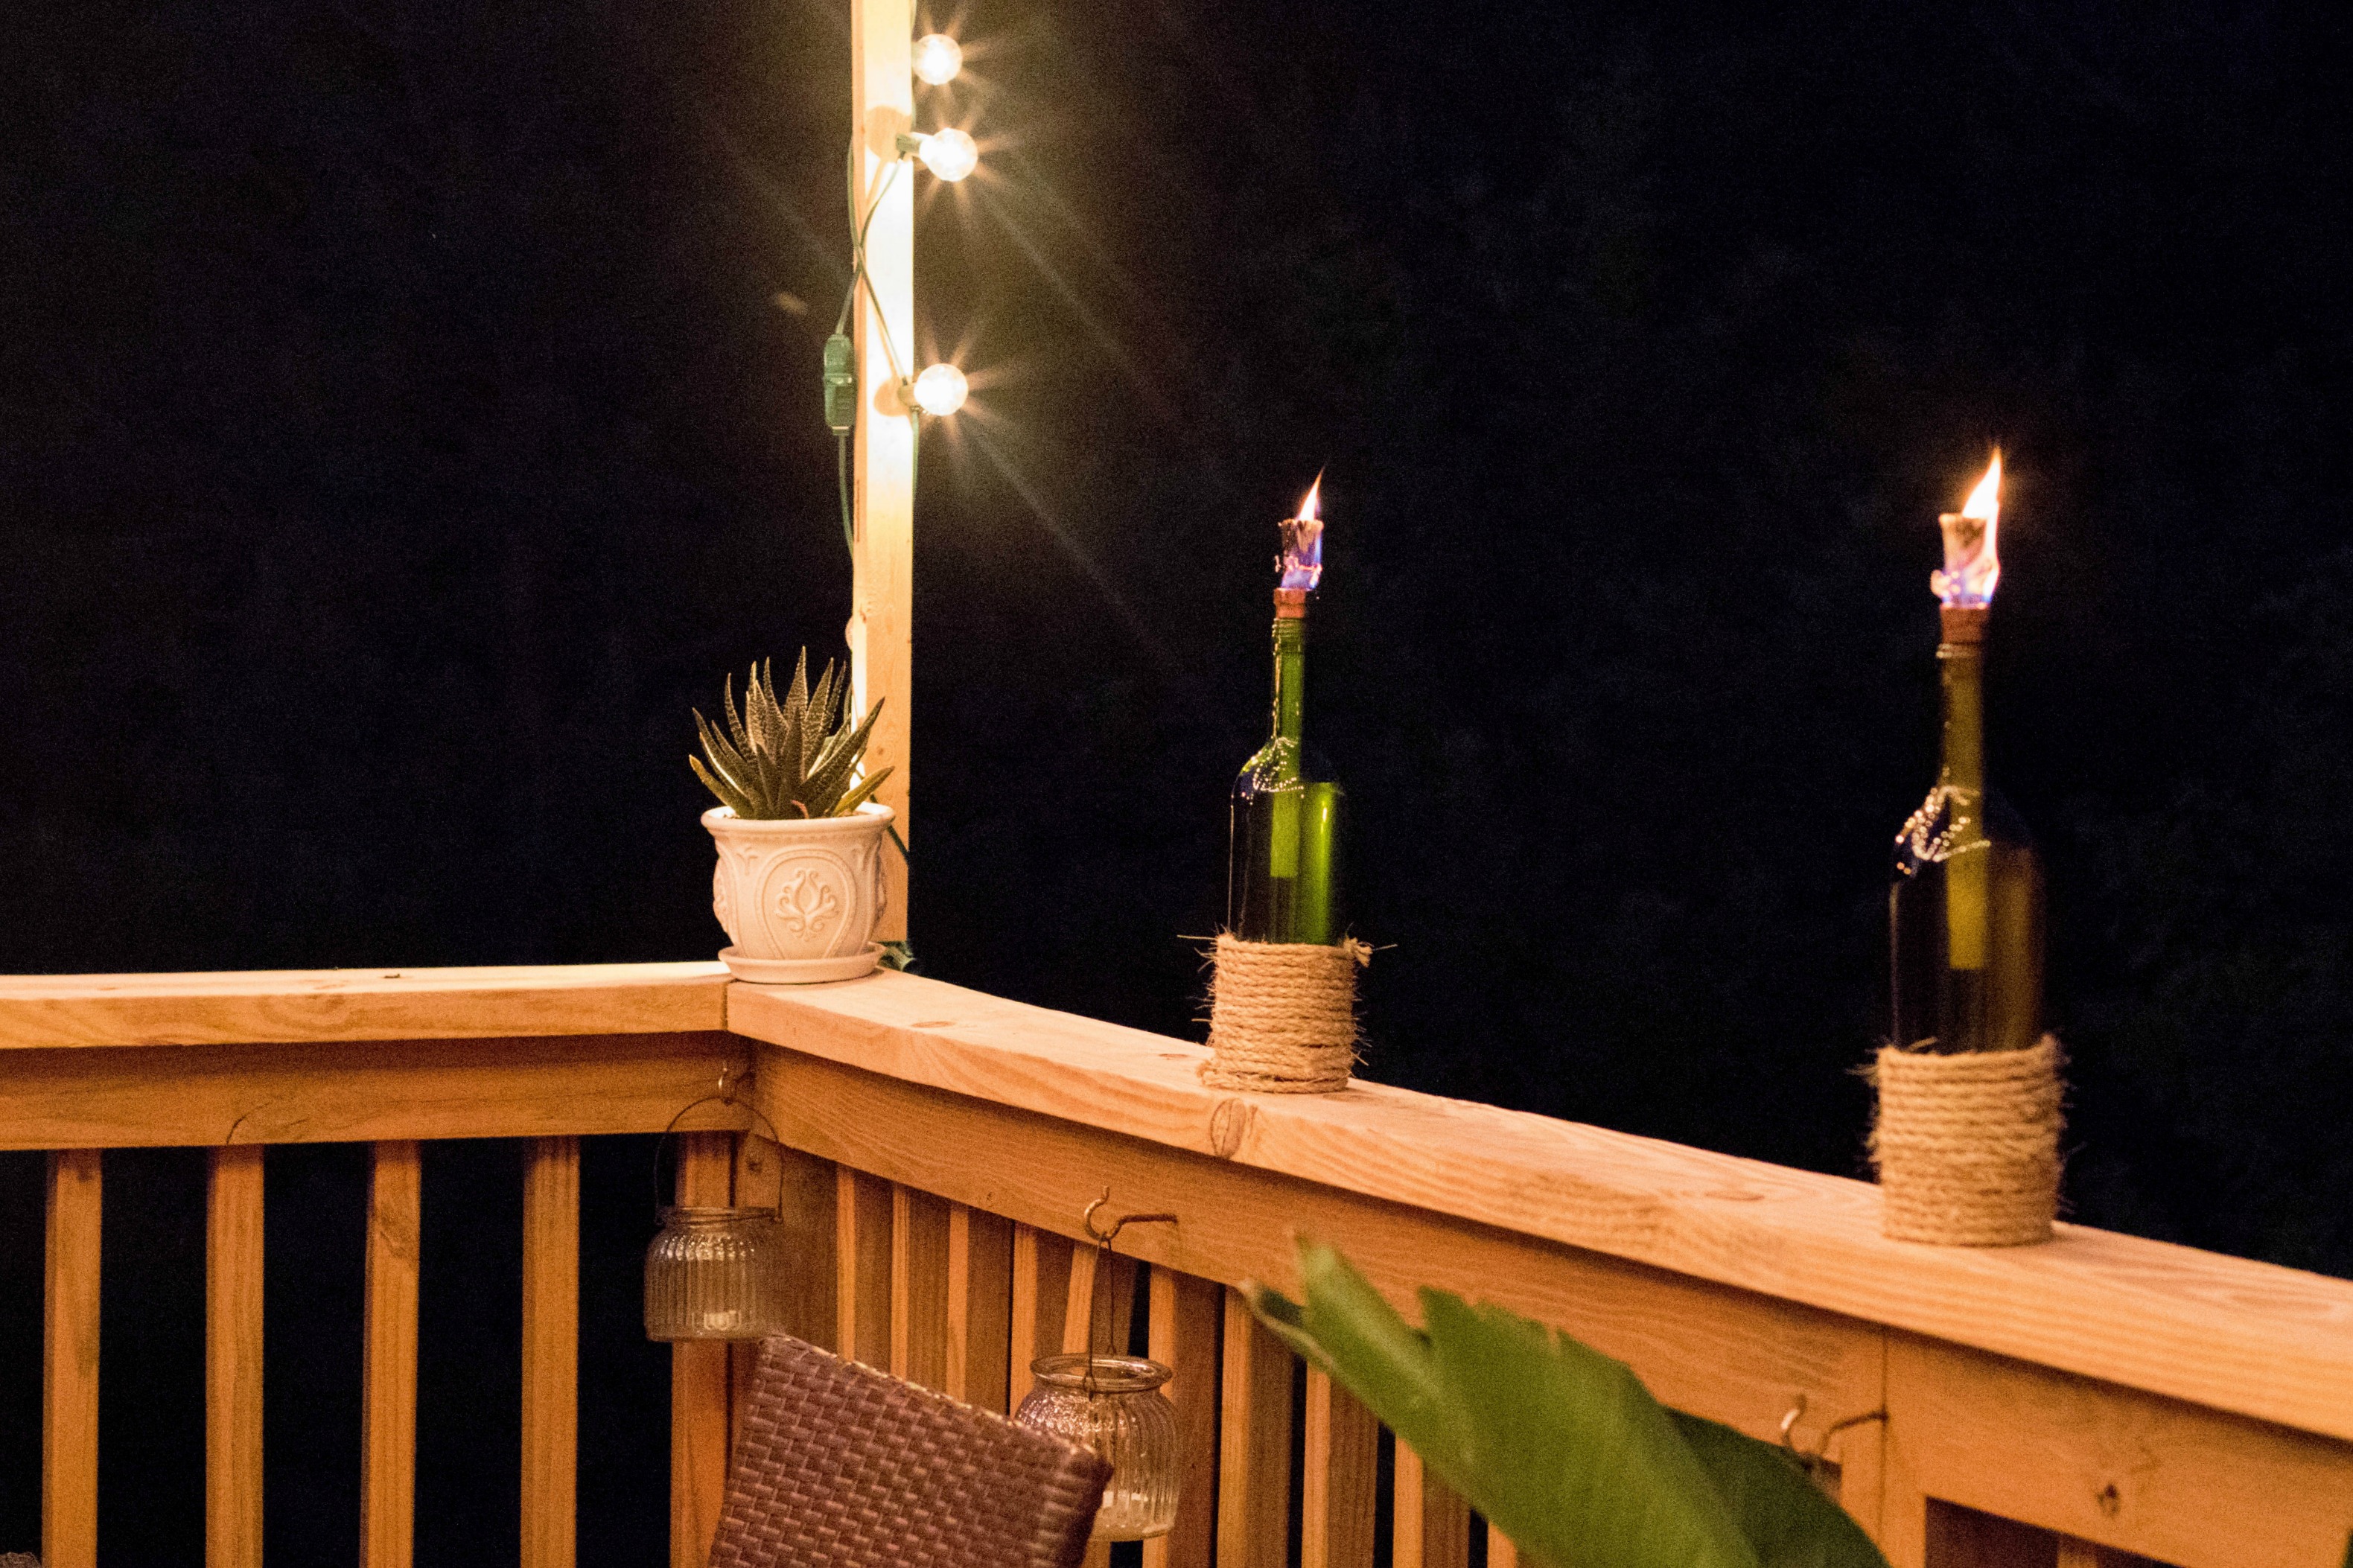 DIY Wine Bottle Tiki Torch by coffee blogger Amy of Coffee Beans and Bobby Pins